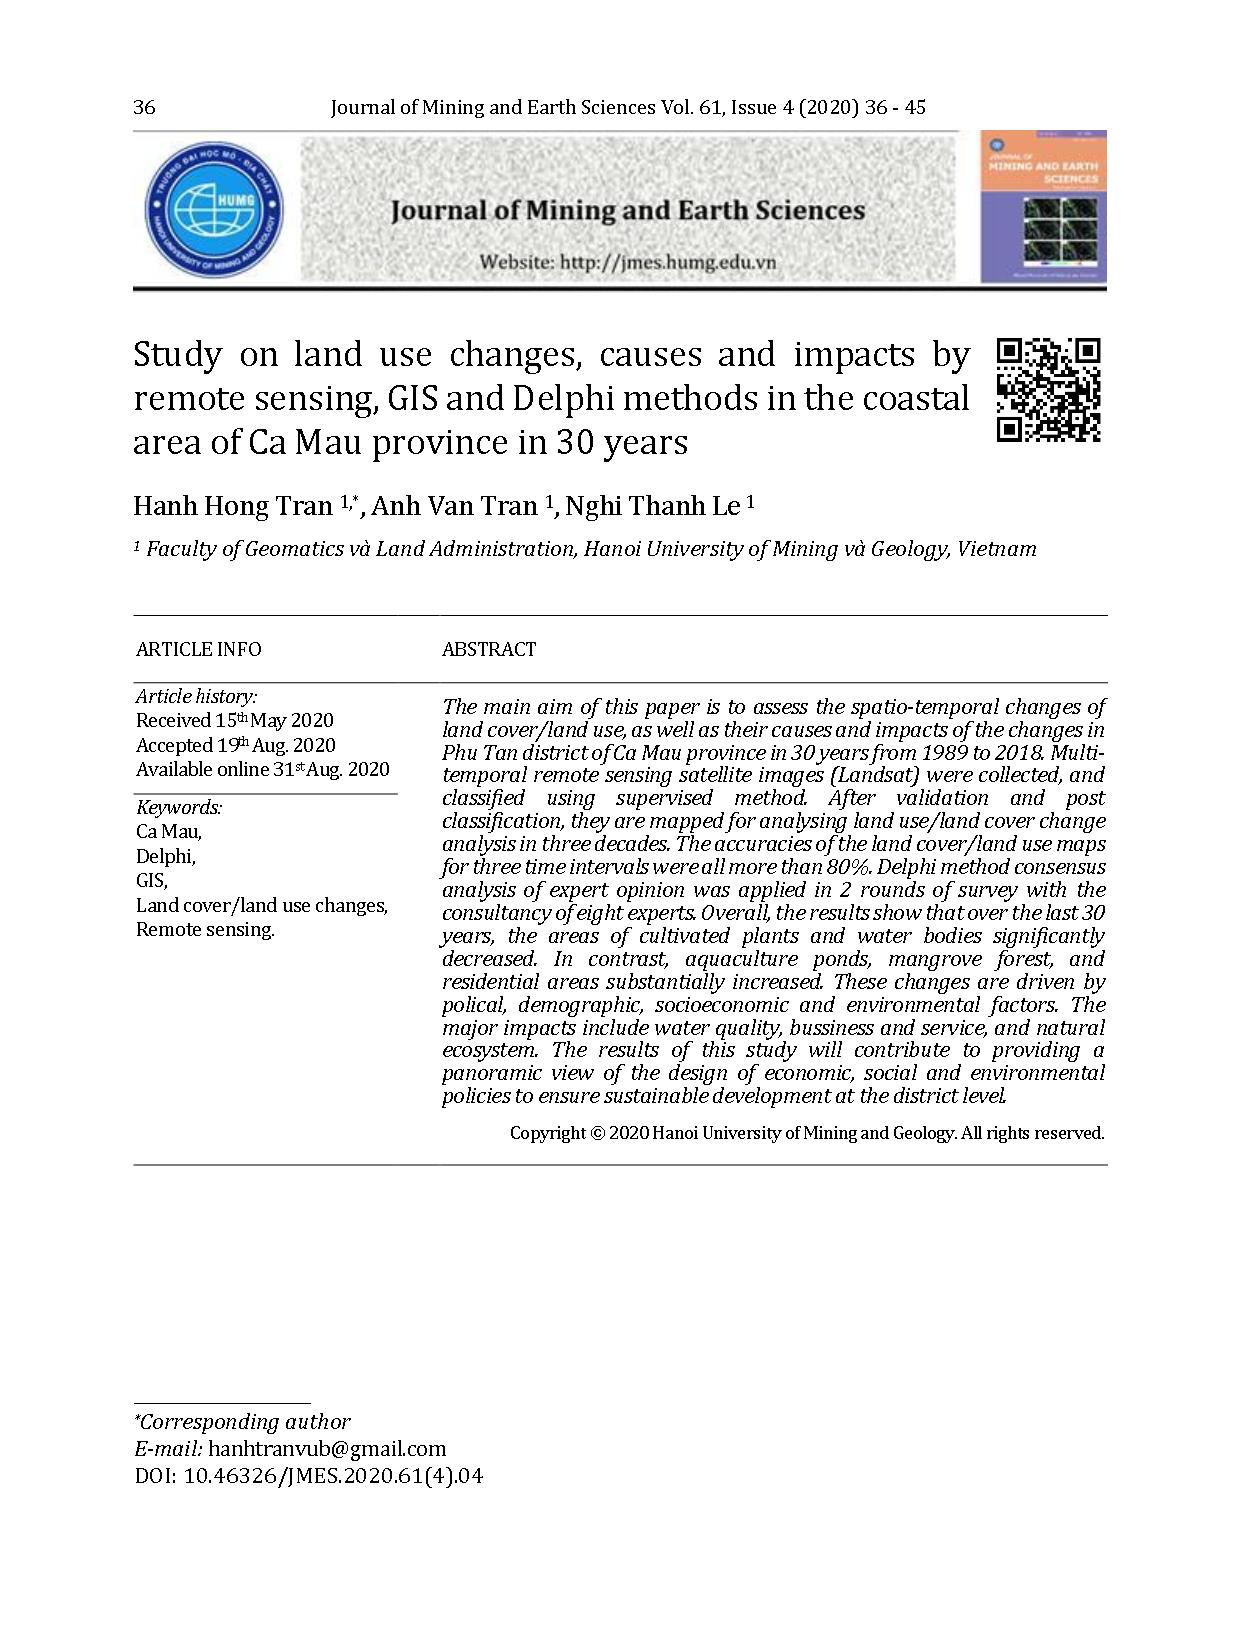 Study on land use changes, causes and impacts by remote sensing, GIS and Delphi methods in the coastal area of Ca Mau province in 30 years trang 1